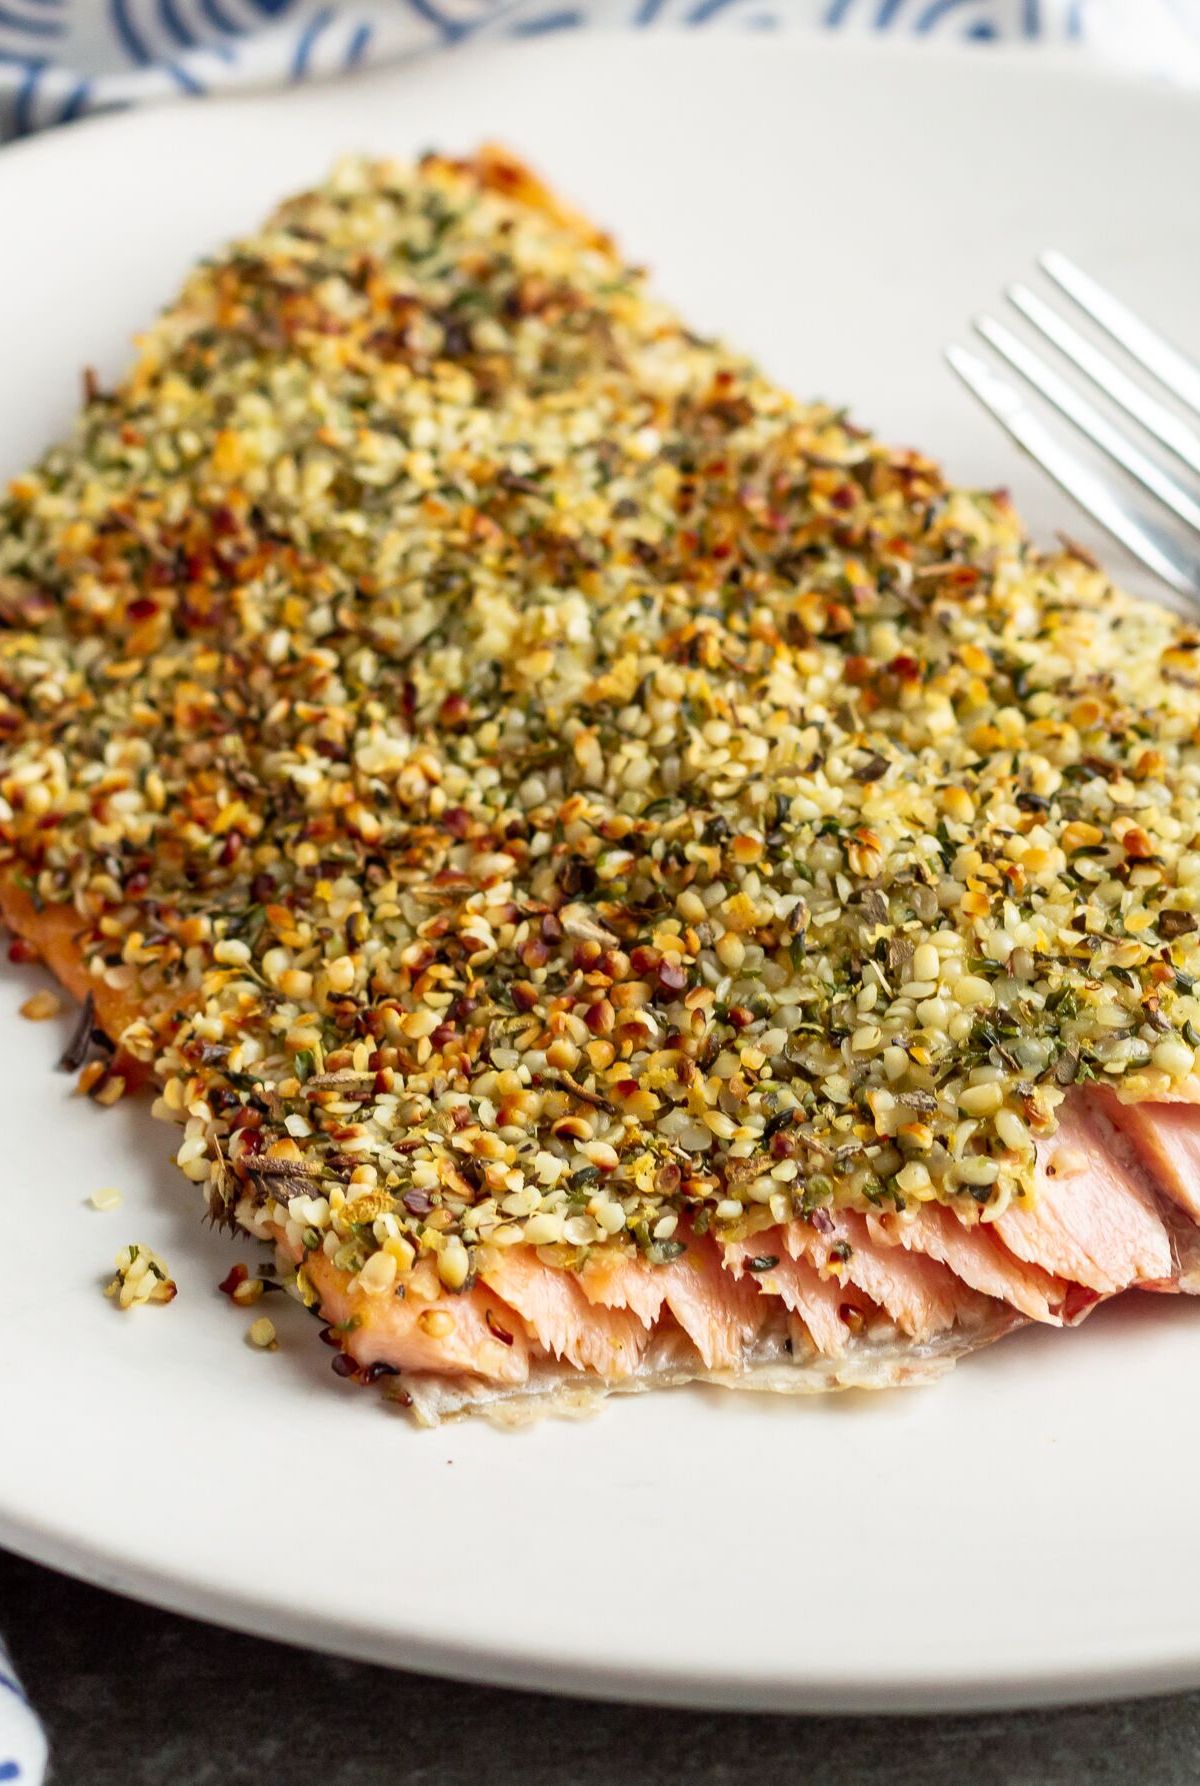 10 Mediterranean Diet Approved Recipes to Add to Your Meal Plan - Hemp Seed Crusted Trout